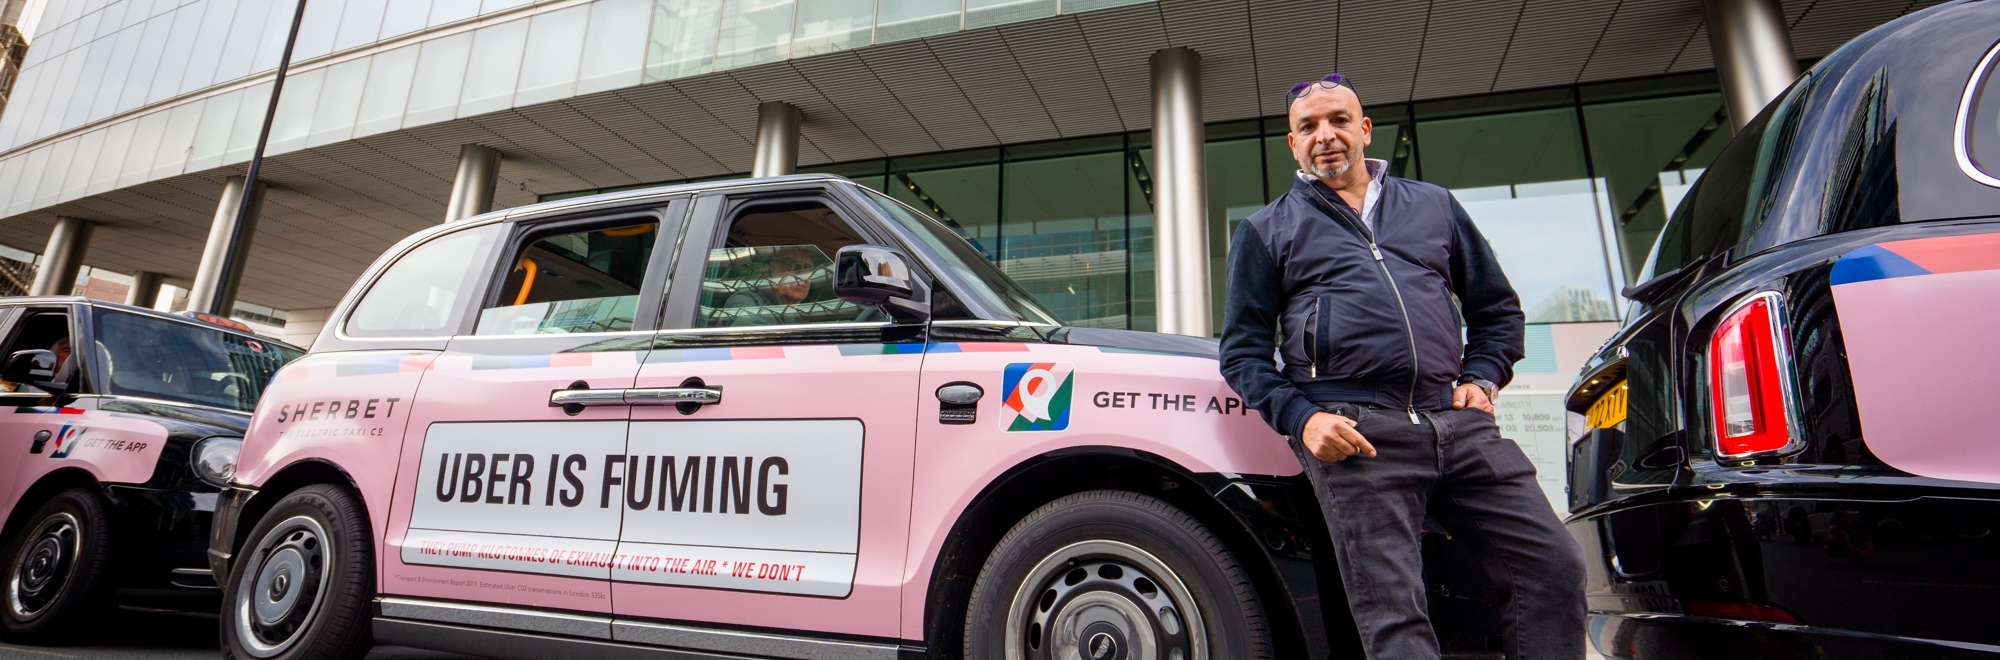 Sherbet transforms its all-electric black taxi fleet to show off its zero emission credentials